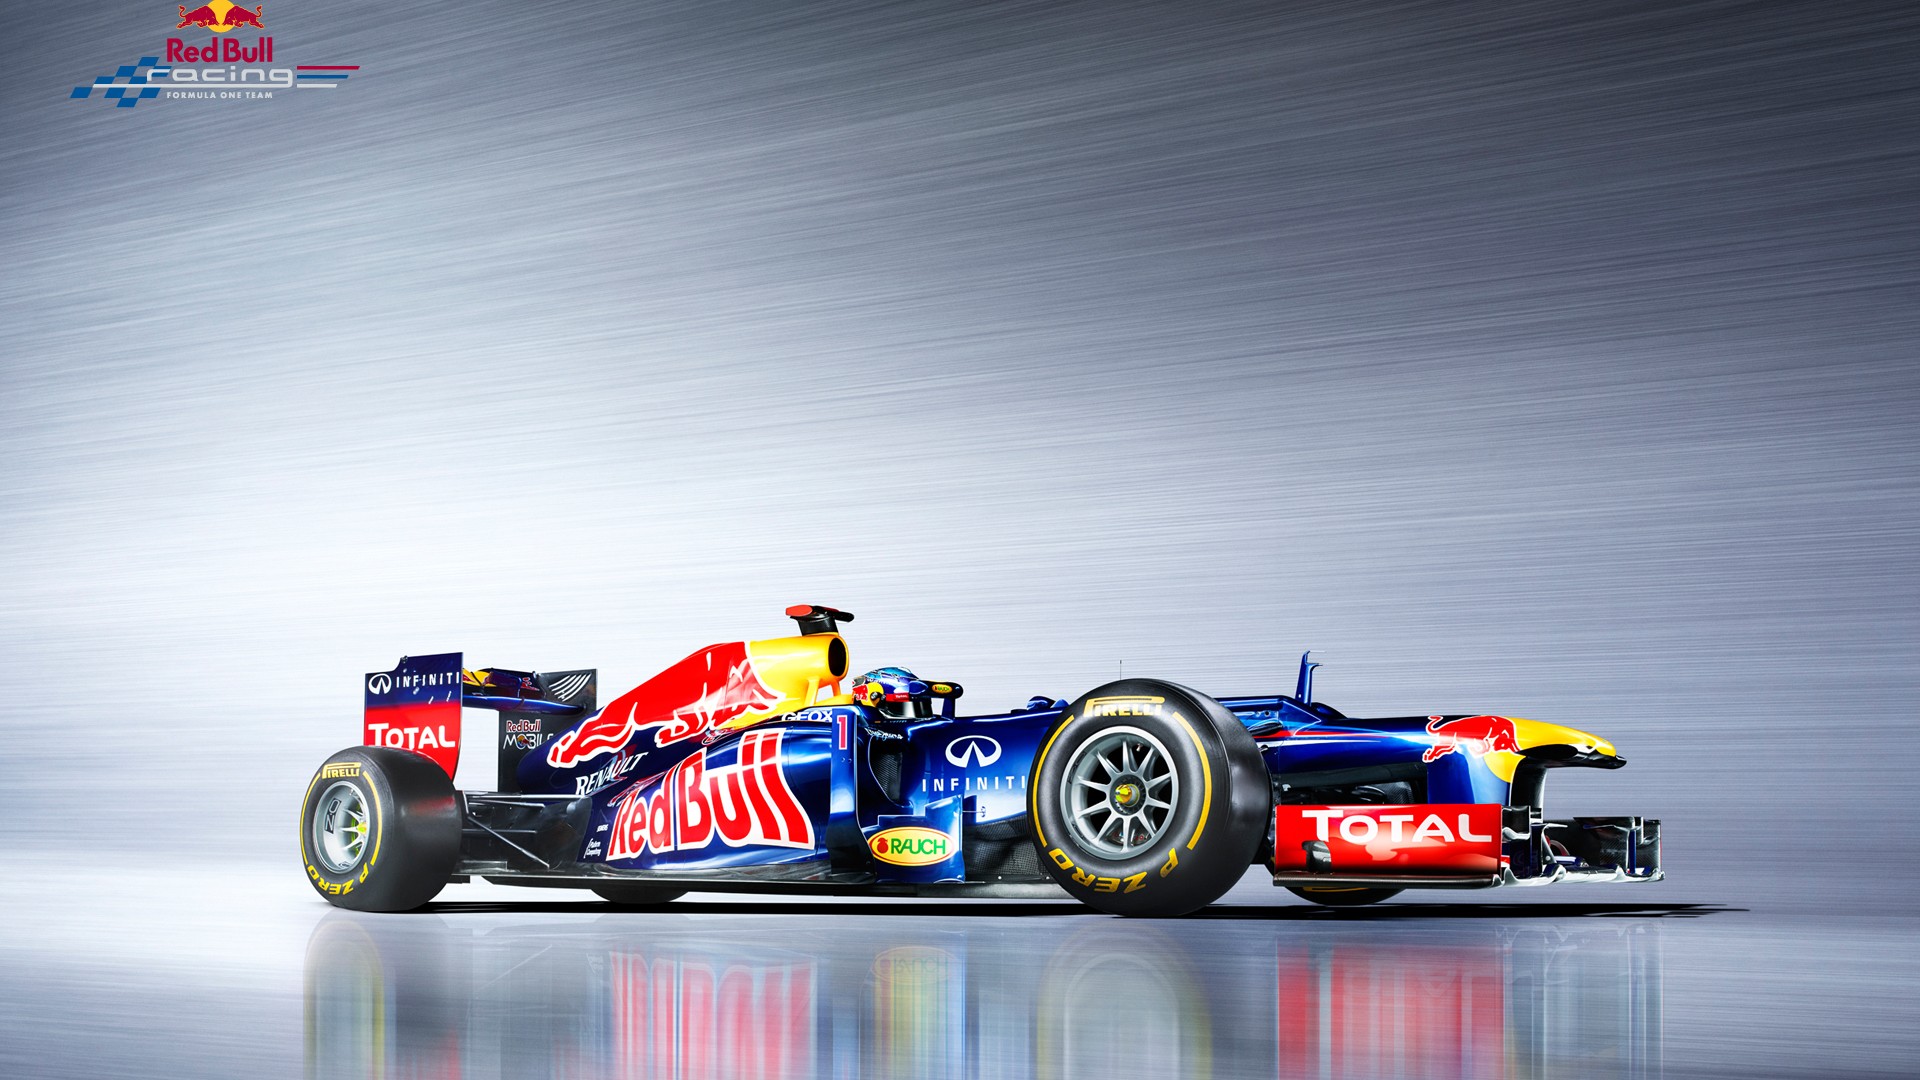 Free Download Pics Photos Red Bull F1 Wallpaper Hd 19x1080 For Your Desktop Mobile Tablet Explore 65 Red Bull F1 Wallpaper Red Bull Wallpaper Red Bull Racing Wallpaper New